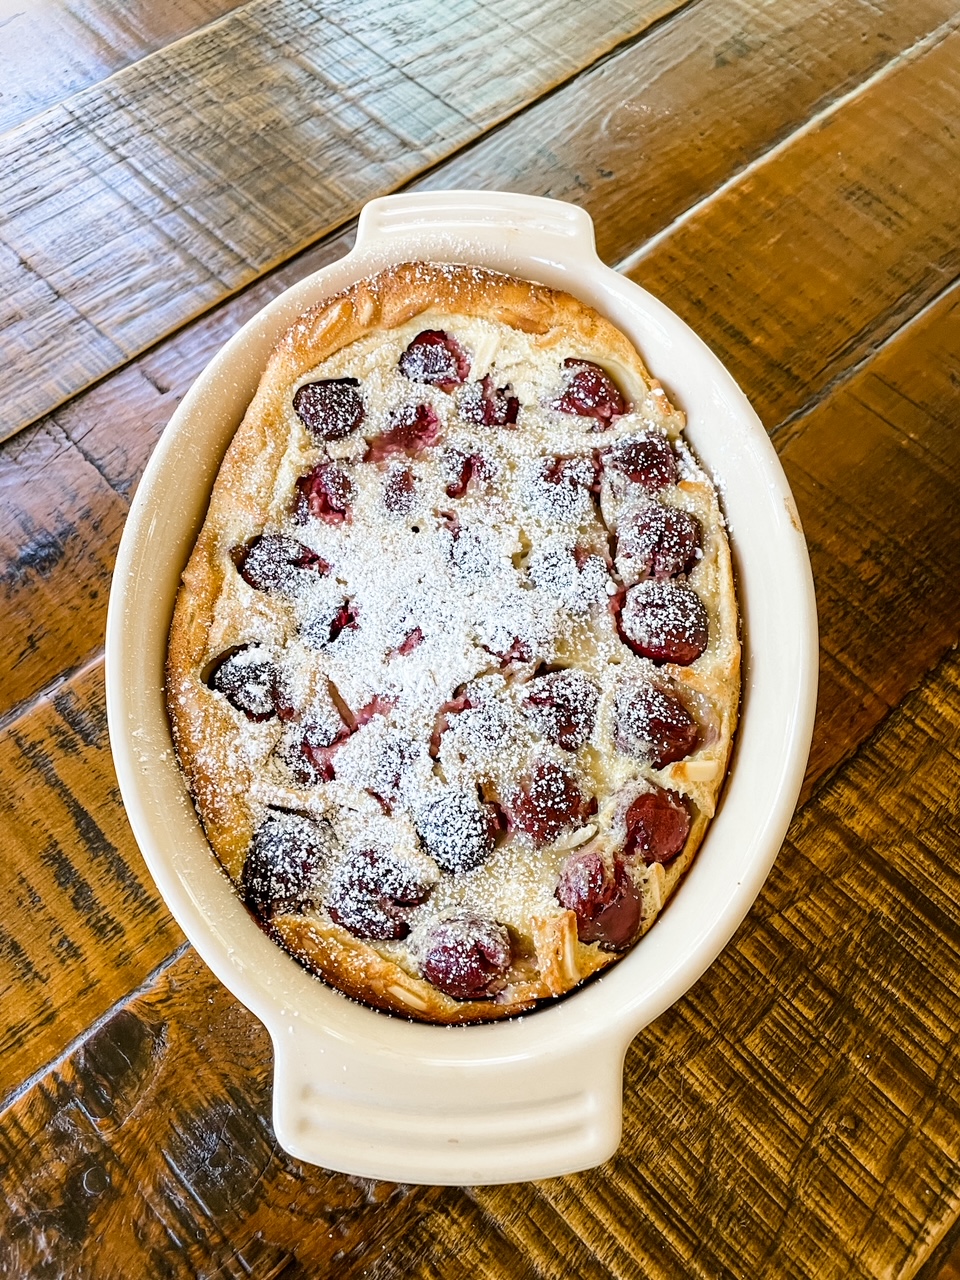 The finished Fresh Cherry Clafoutis in baking pan